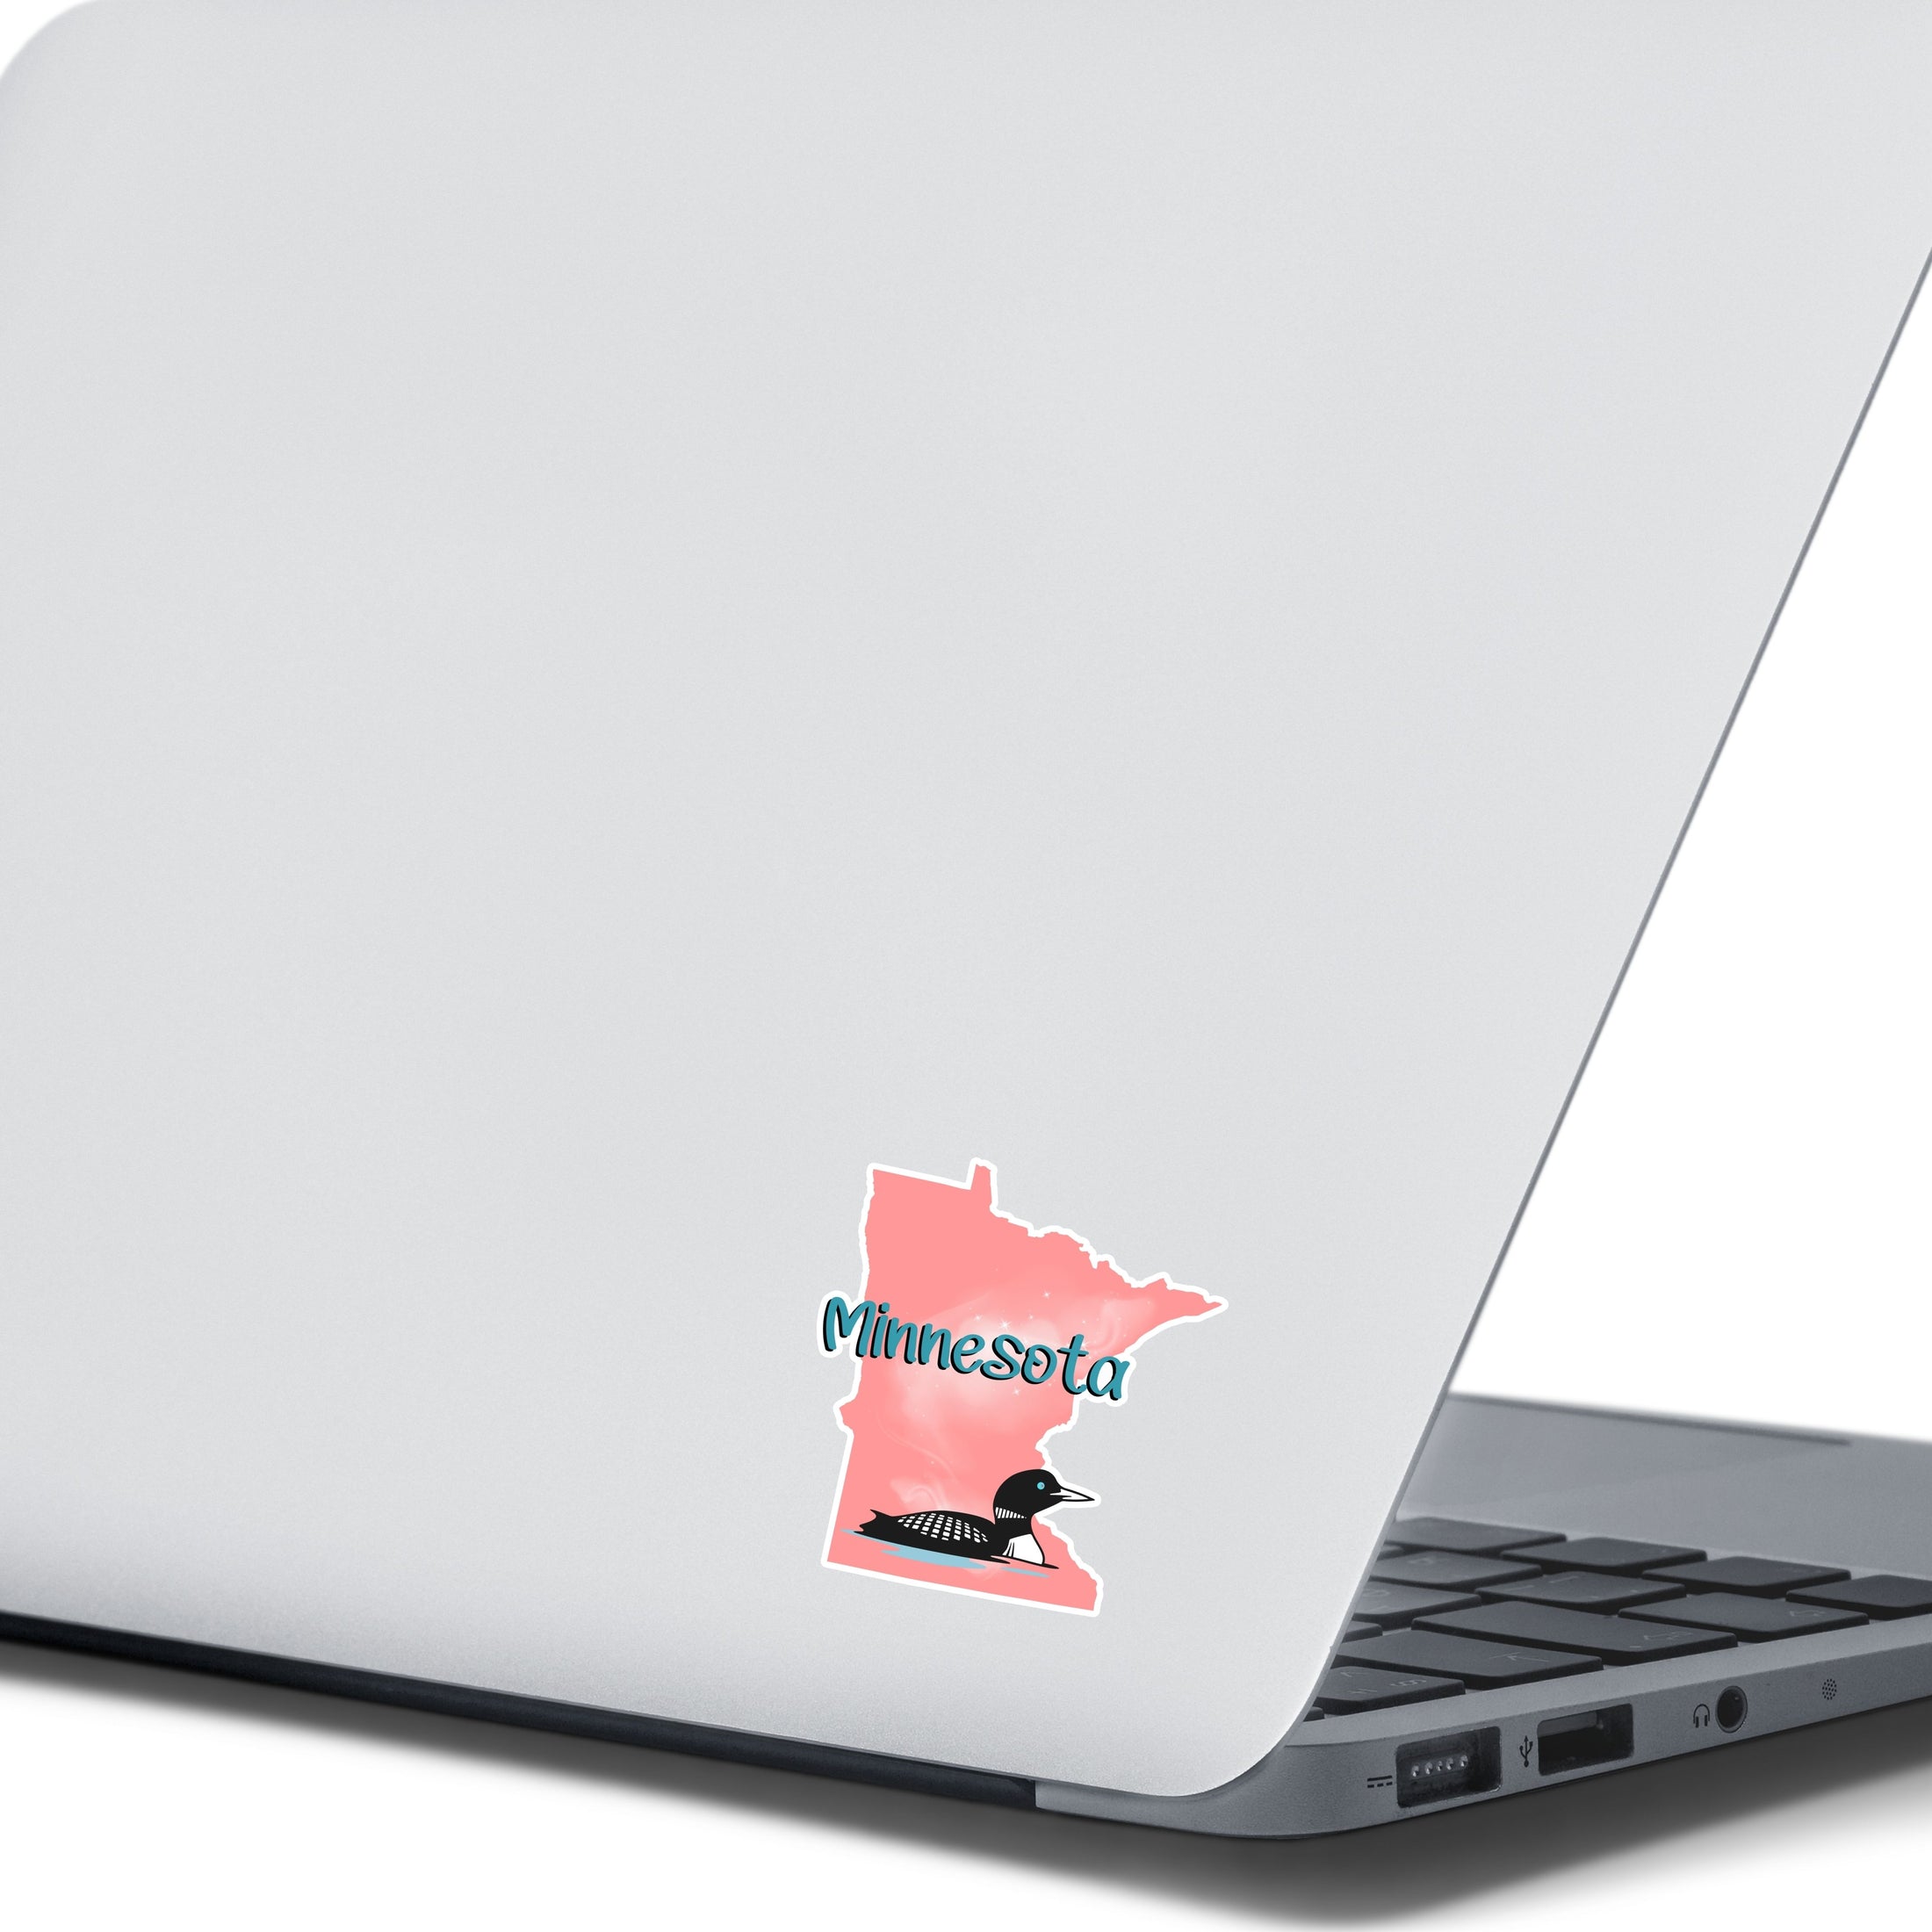 This image shows the MN with loon sticker on the back of an open laptop.